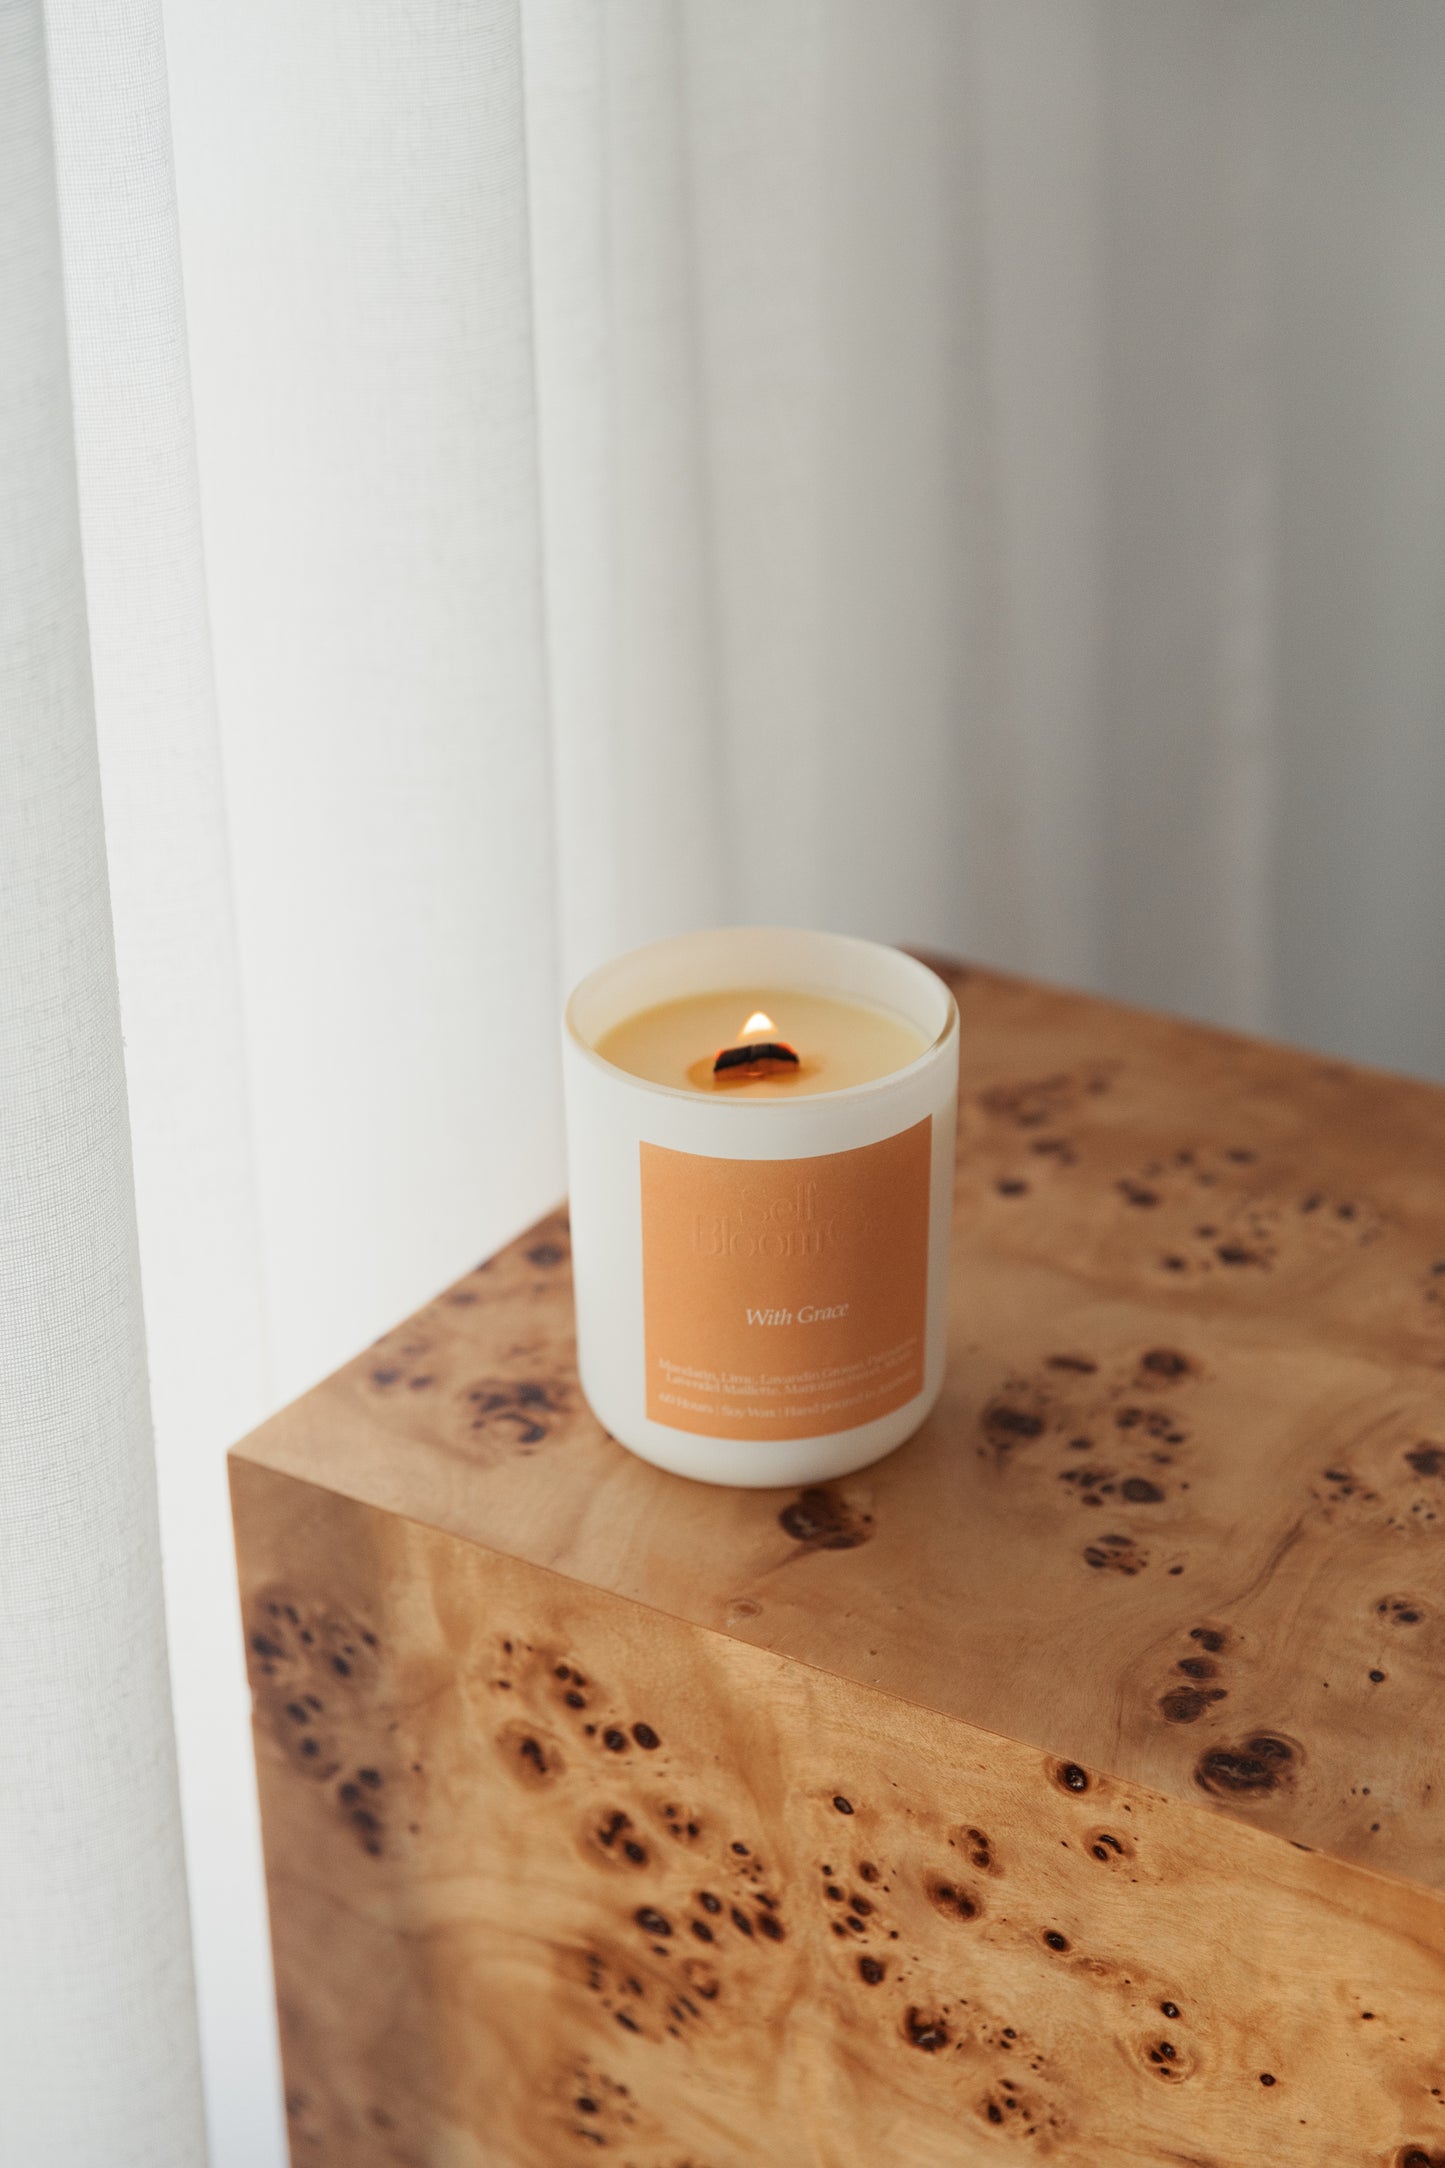 Self Bloom Candle - With Grace